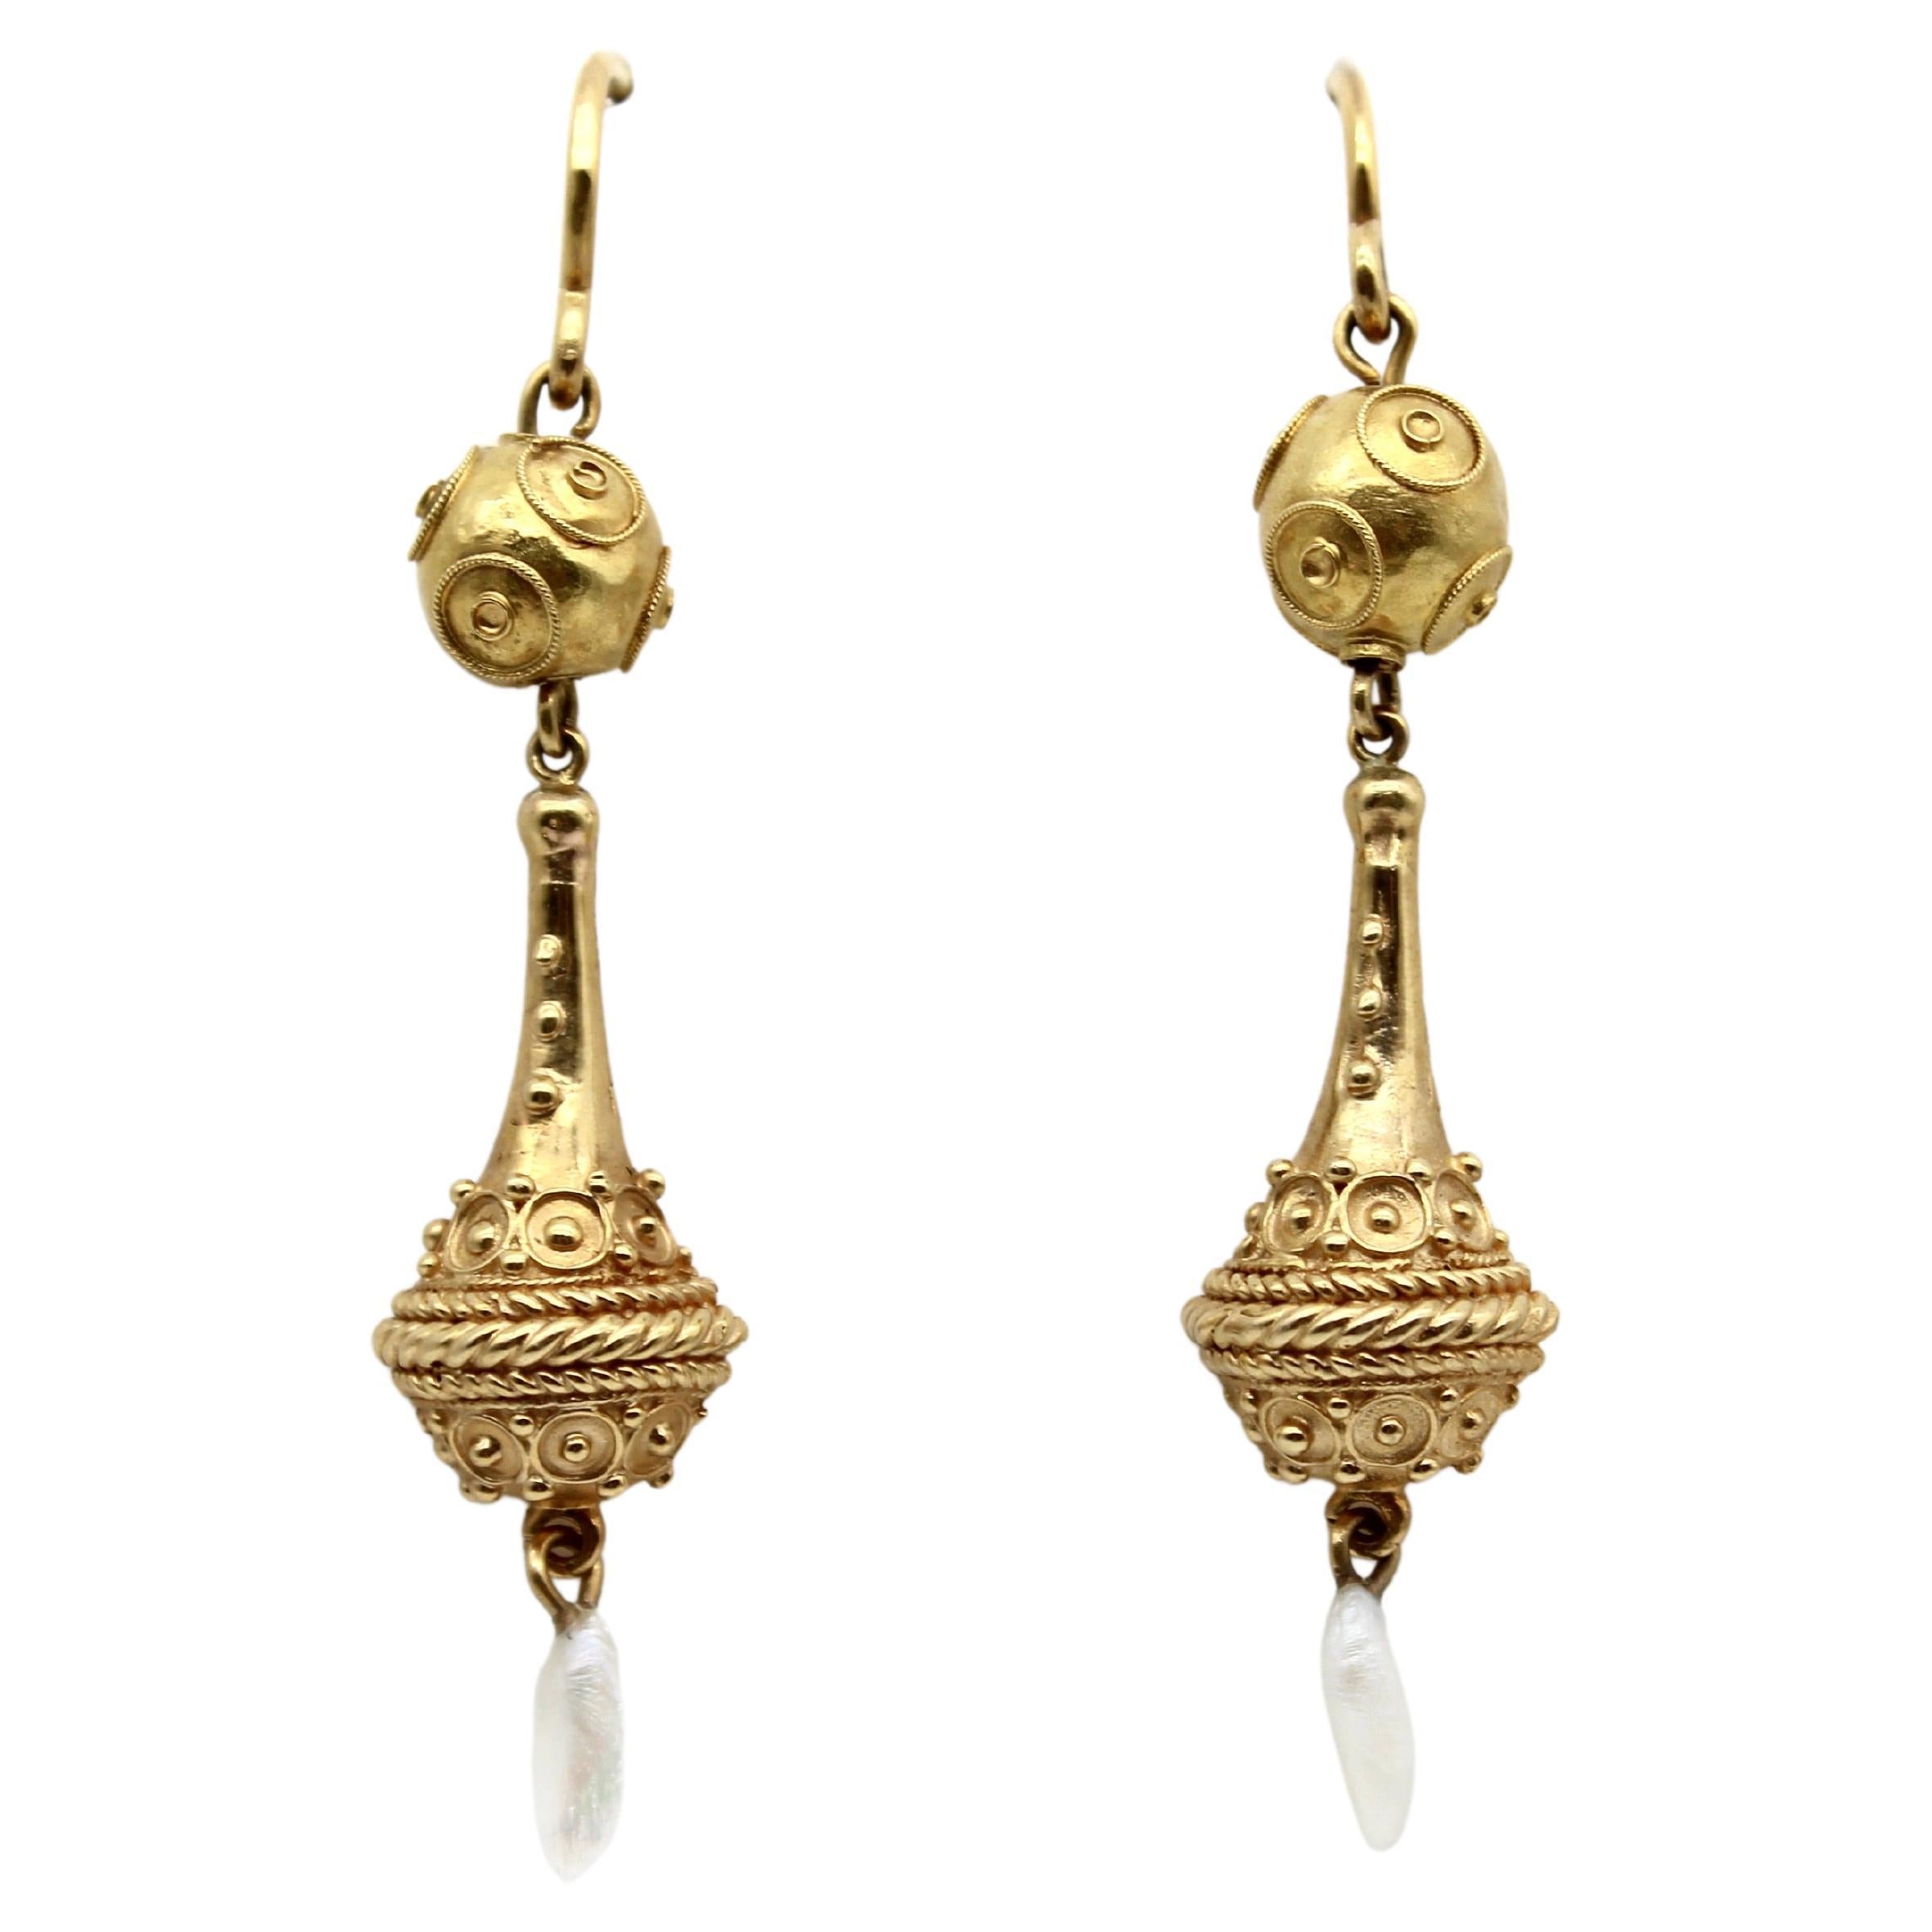 14k Gold Victorian Etruscan Revival Dangle Earrings with Pearls